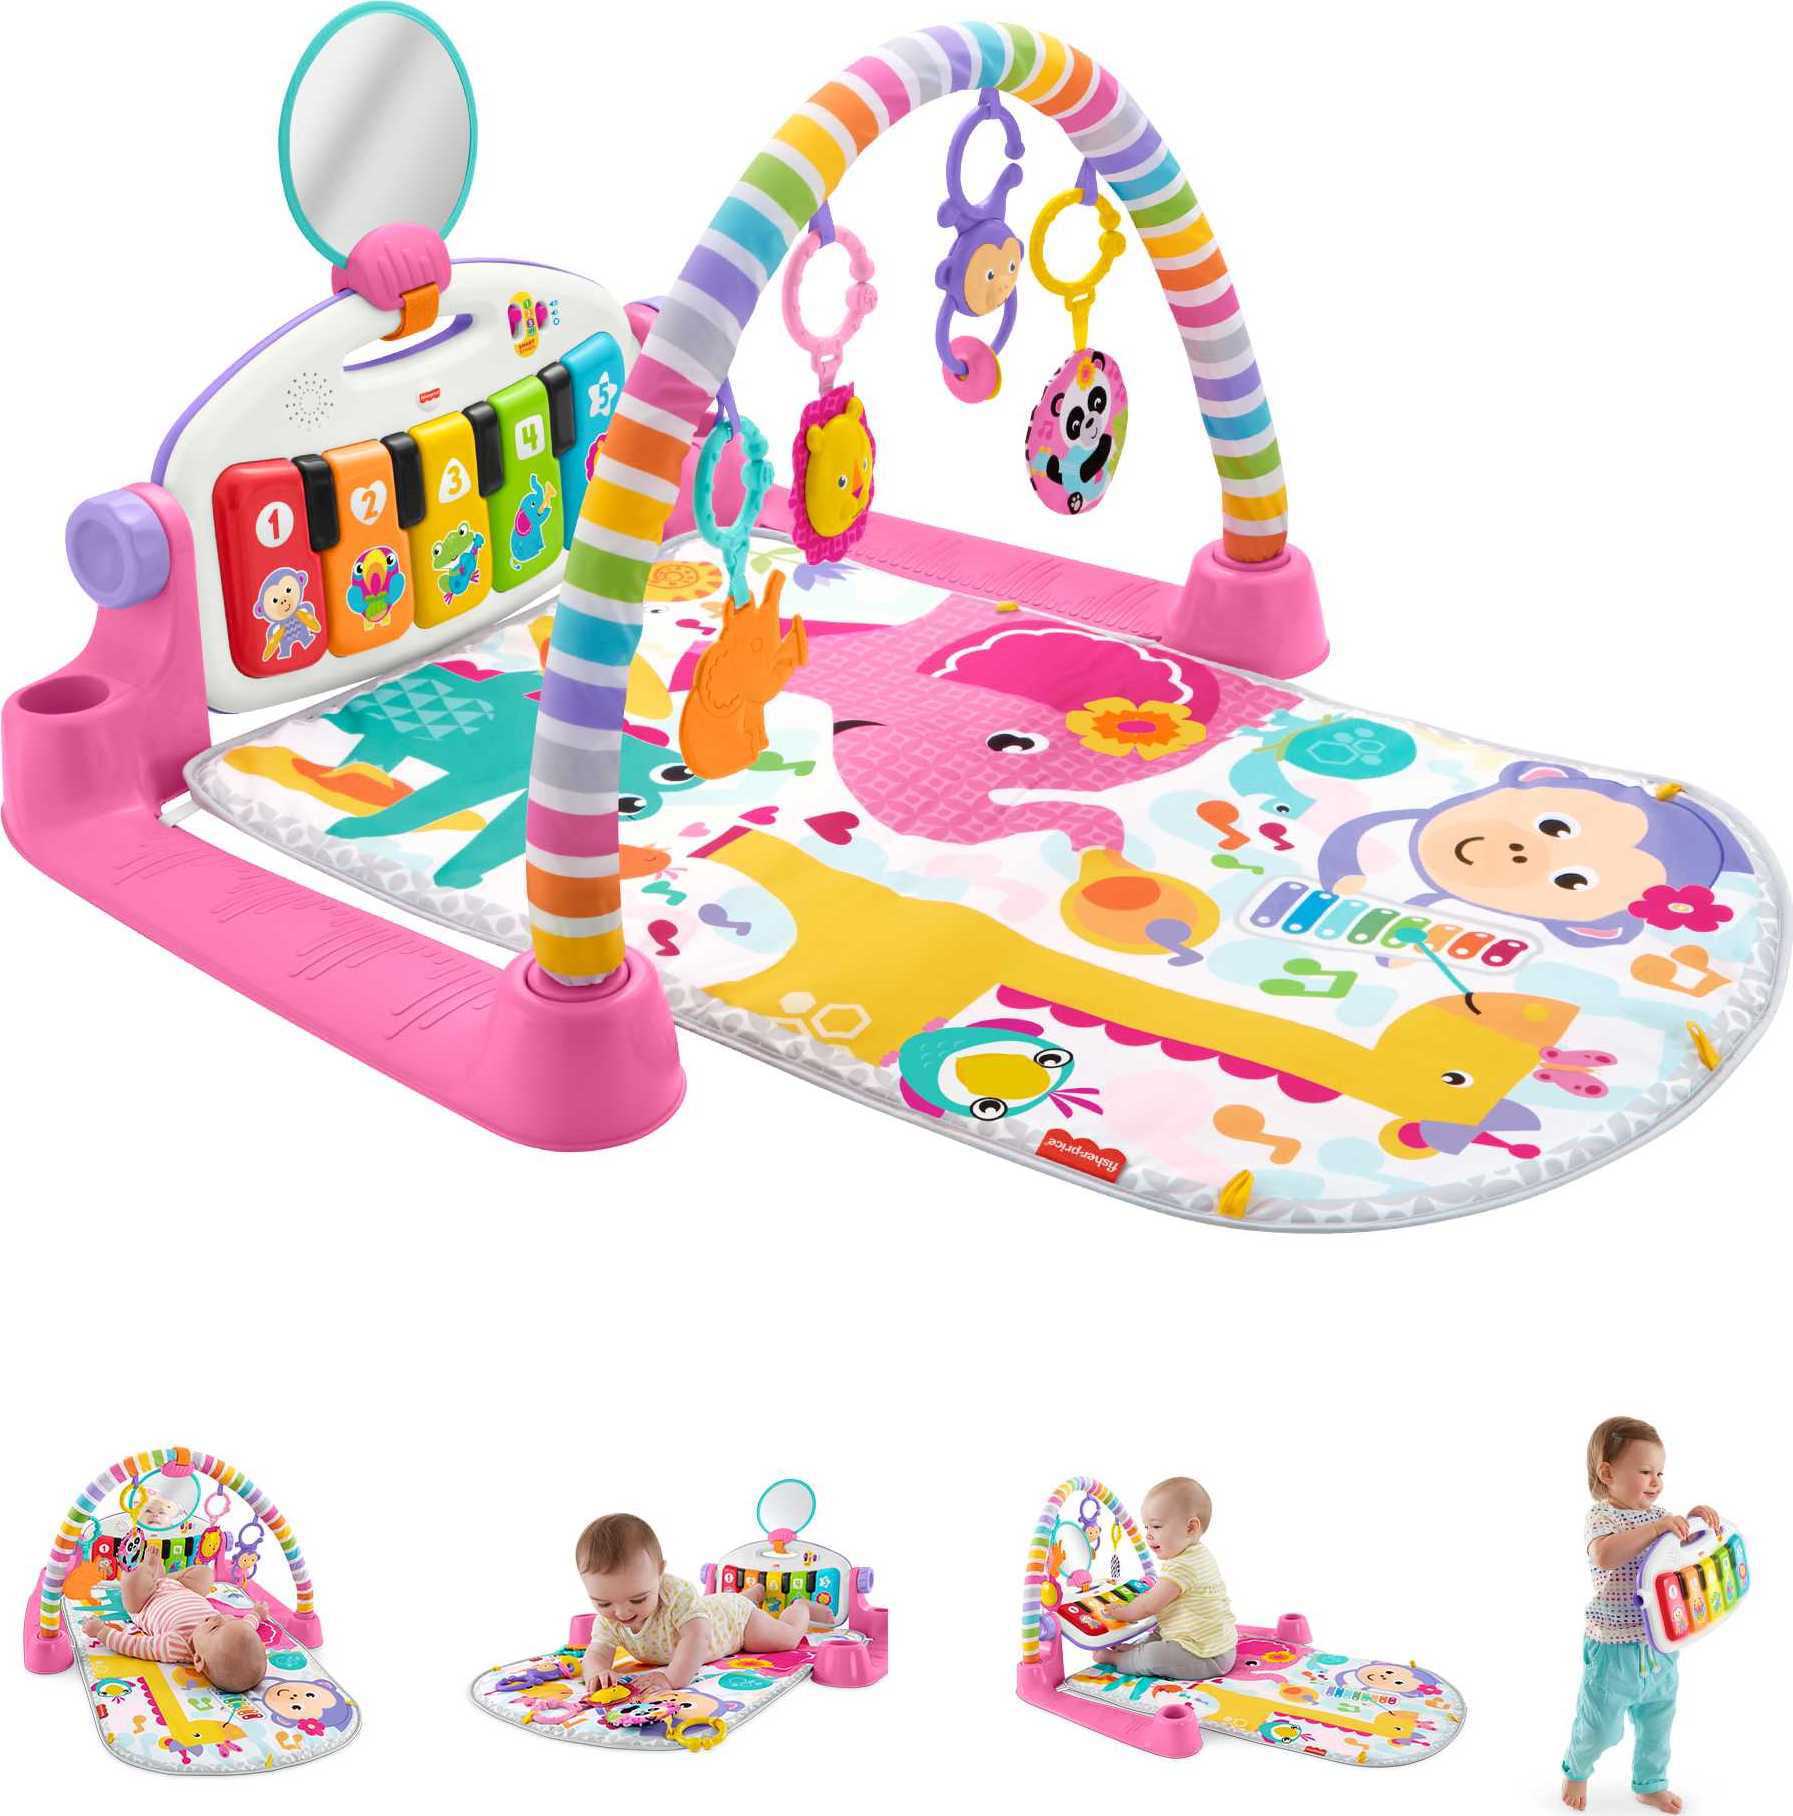 Play Mat Activity Gym for Baby Activity Toys Sit and Play MooToys Kick and Play Newborn Toy with Piano for Baby 1-36 Month Lay and Play Pink 